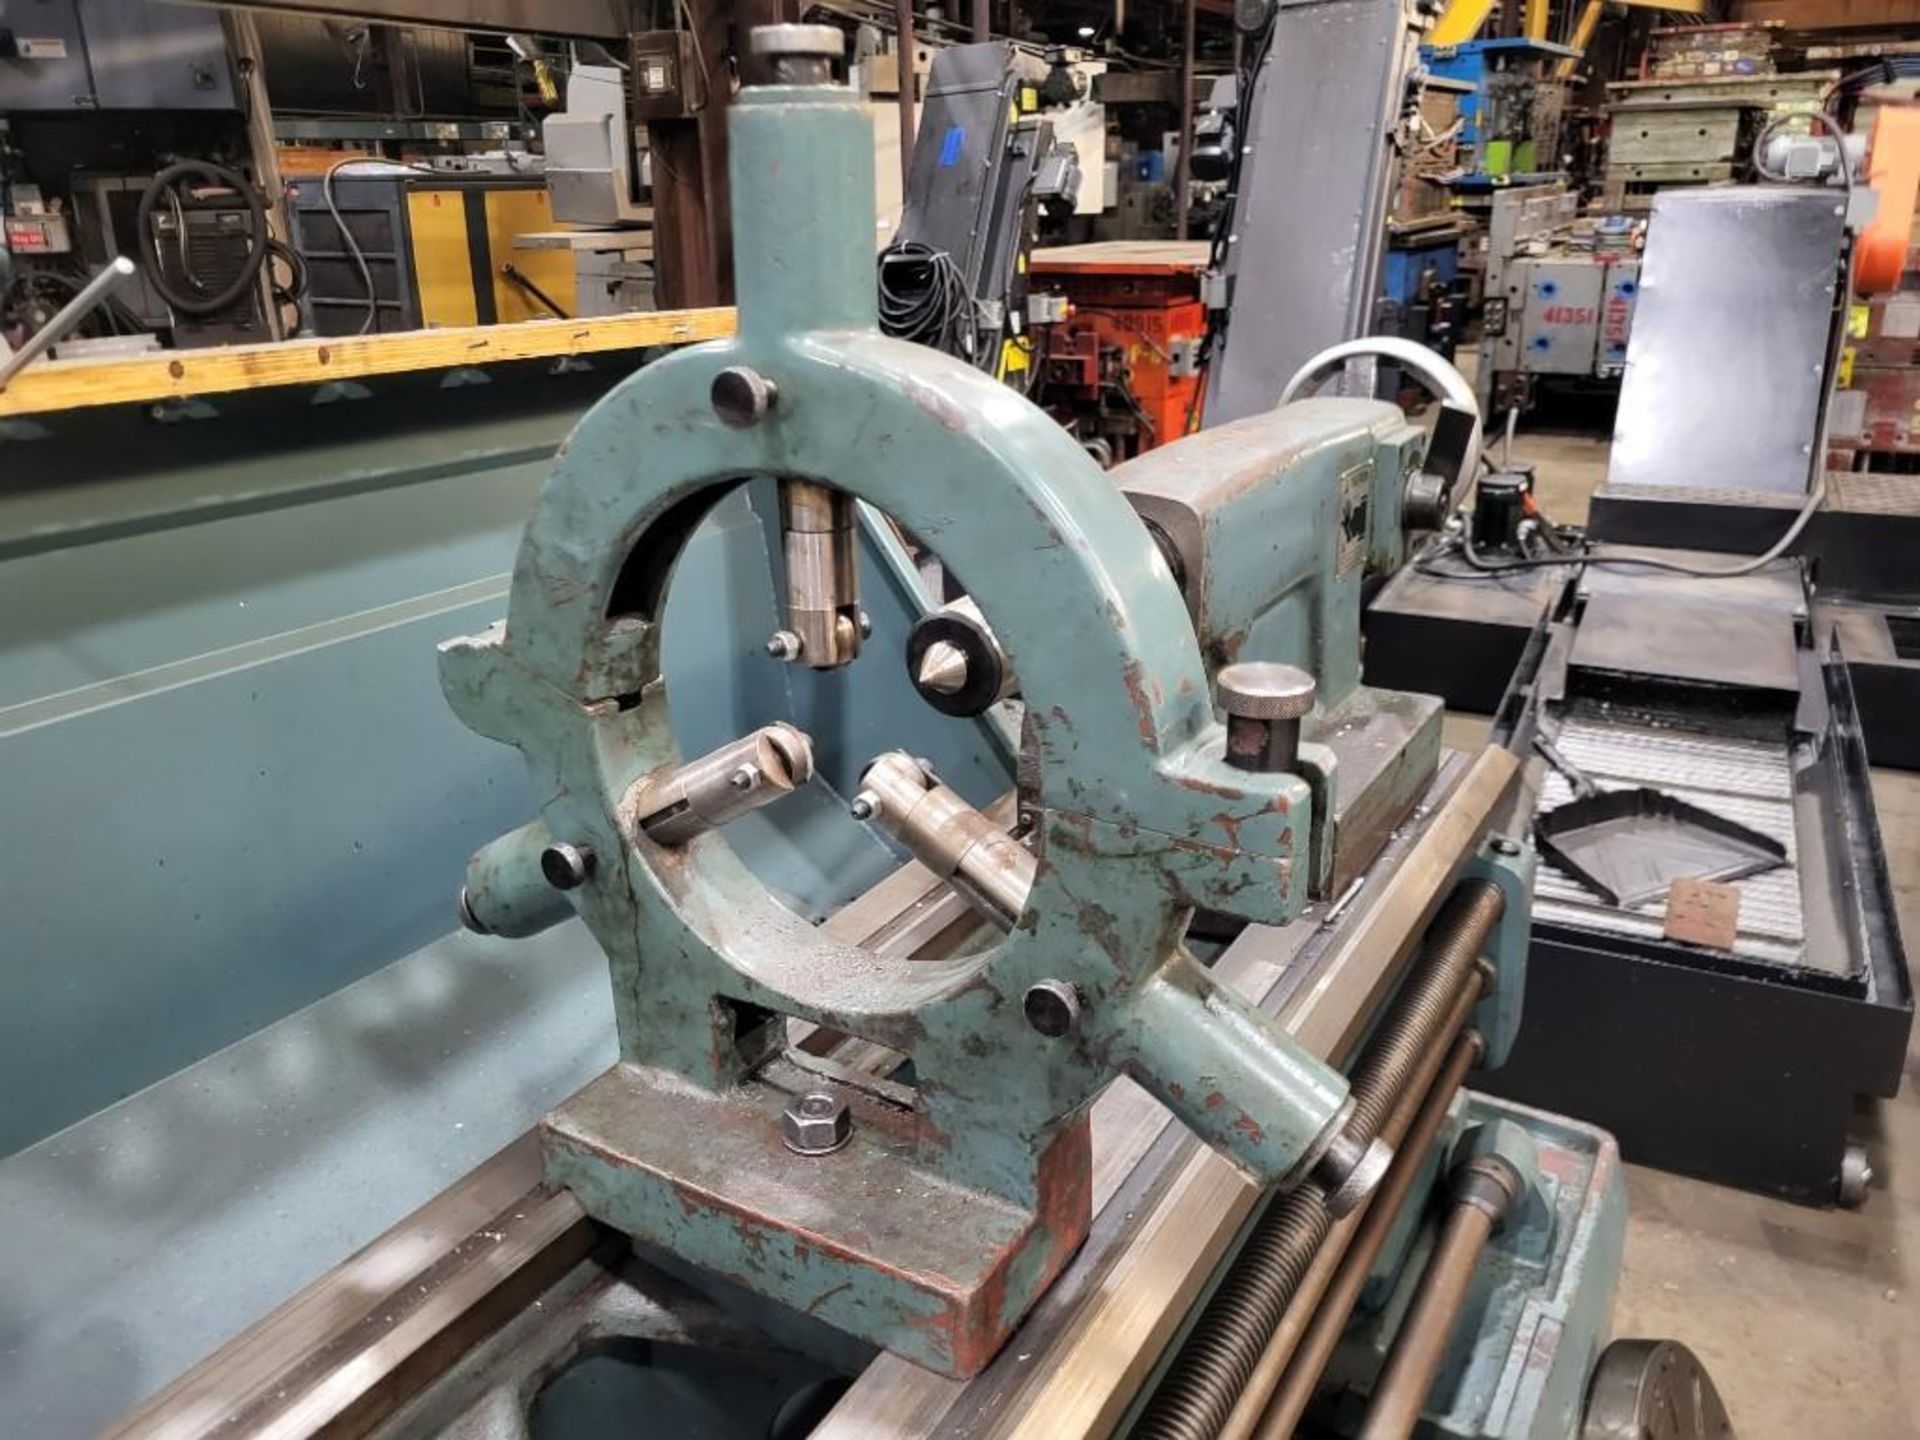 VICTOR 2080S 20" X 80" GAP BED PRECISION LATHE, WITH TAILSTOCK, CHUCK, STEADY REST, TOOLING - Image 17 of 28